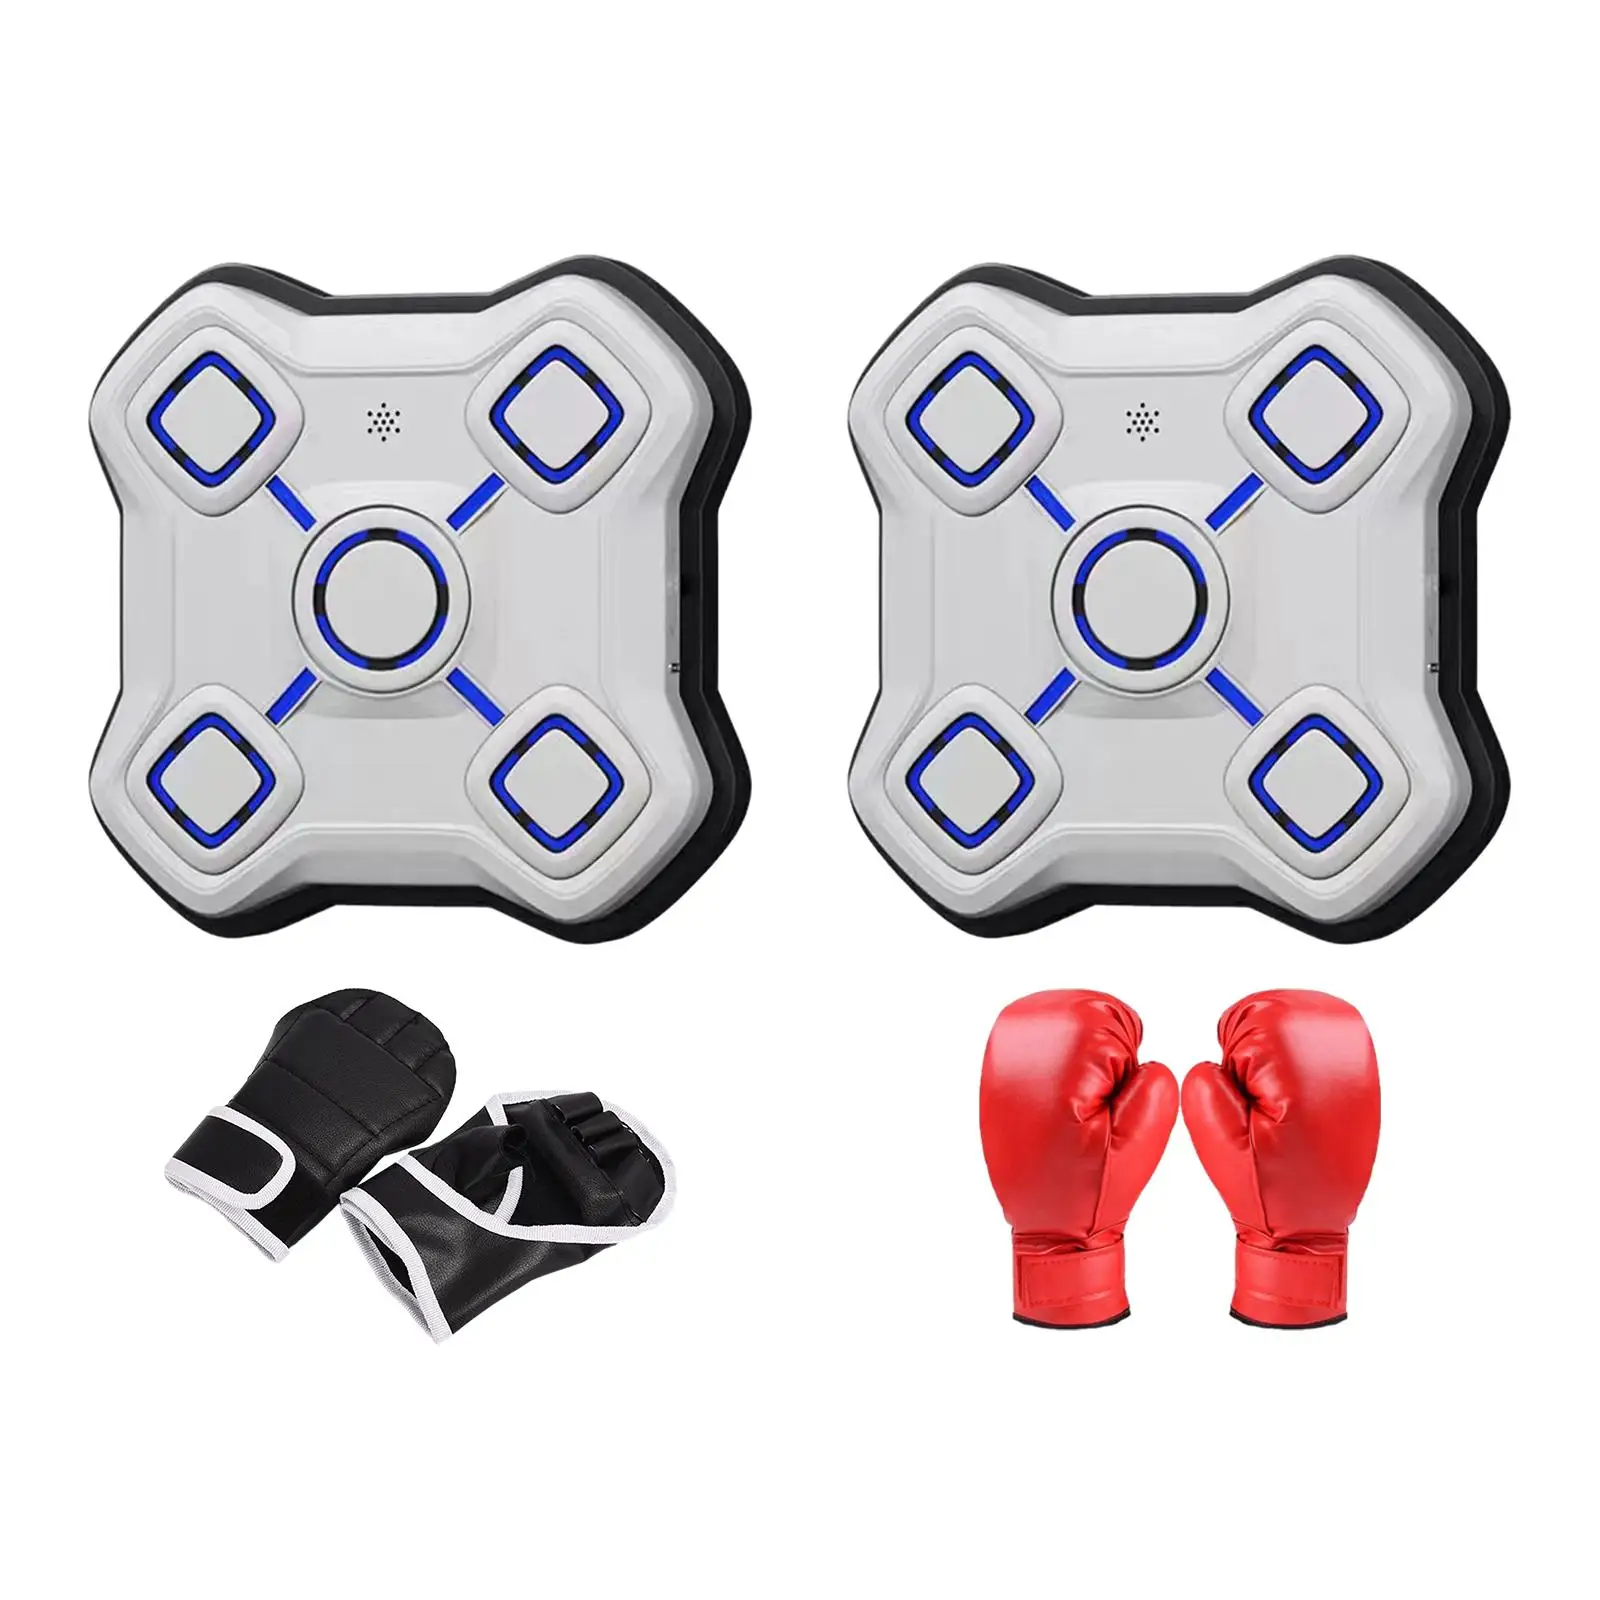 Music Boxing Machine Boxing Trainer Electronic Music Boxing Wall Target for Workout Agility Reaction Exercise Response Training